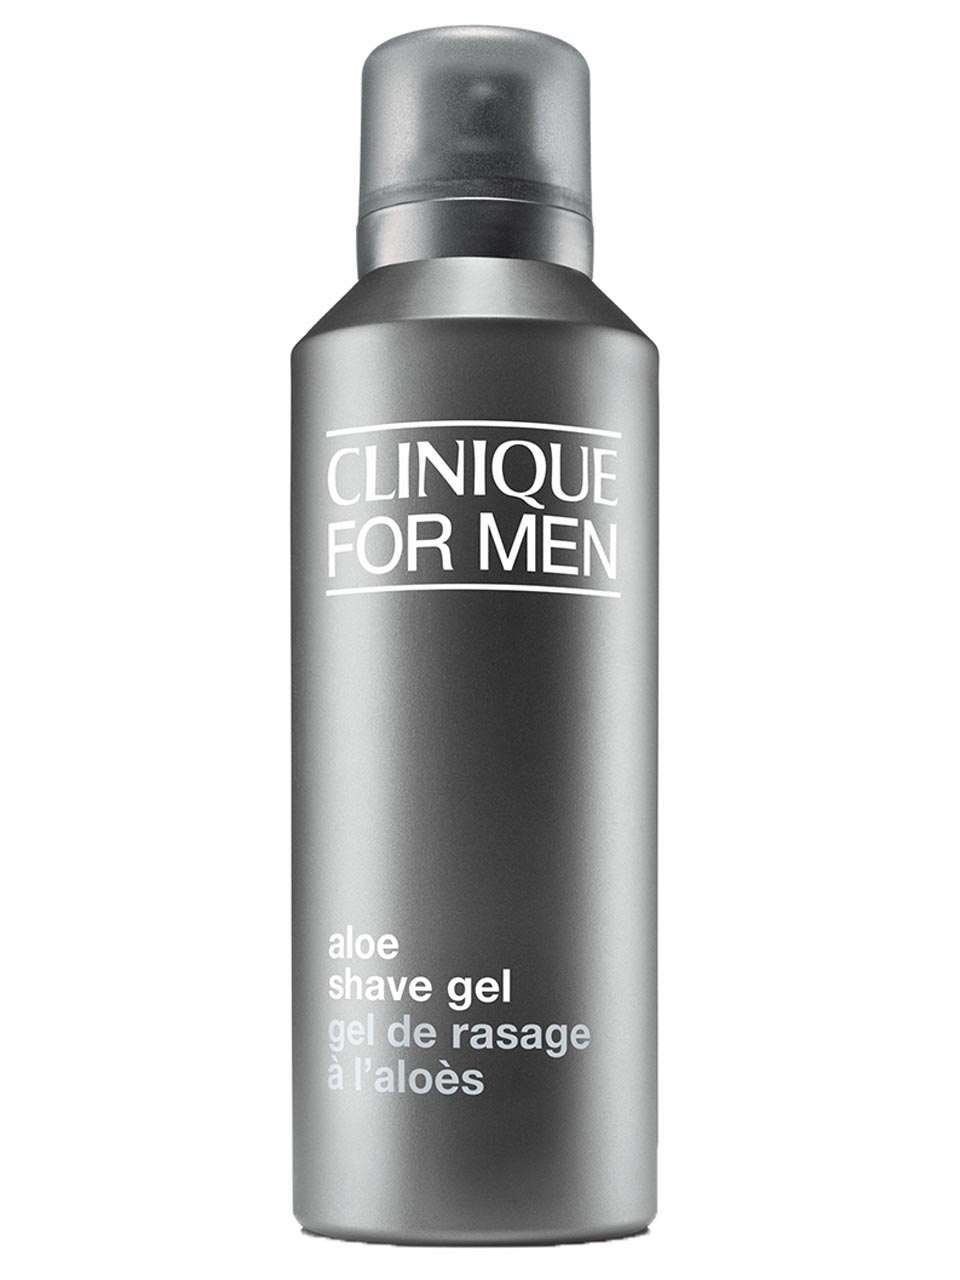 Clinique For Men Aloe Shave Gel 125 ml null - onesize - 1